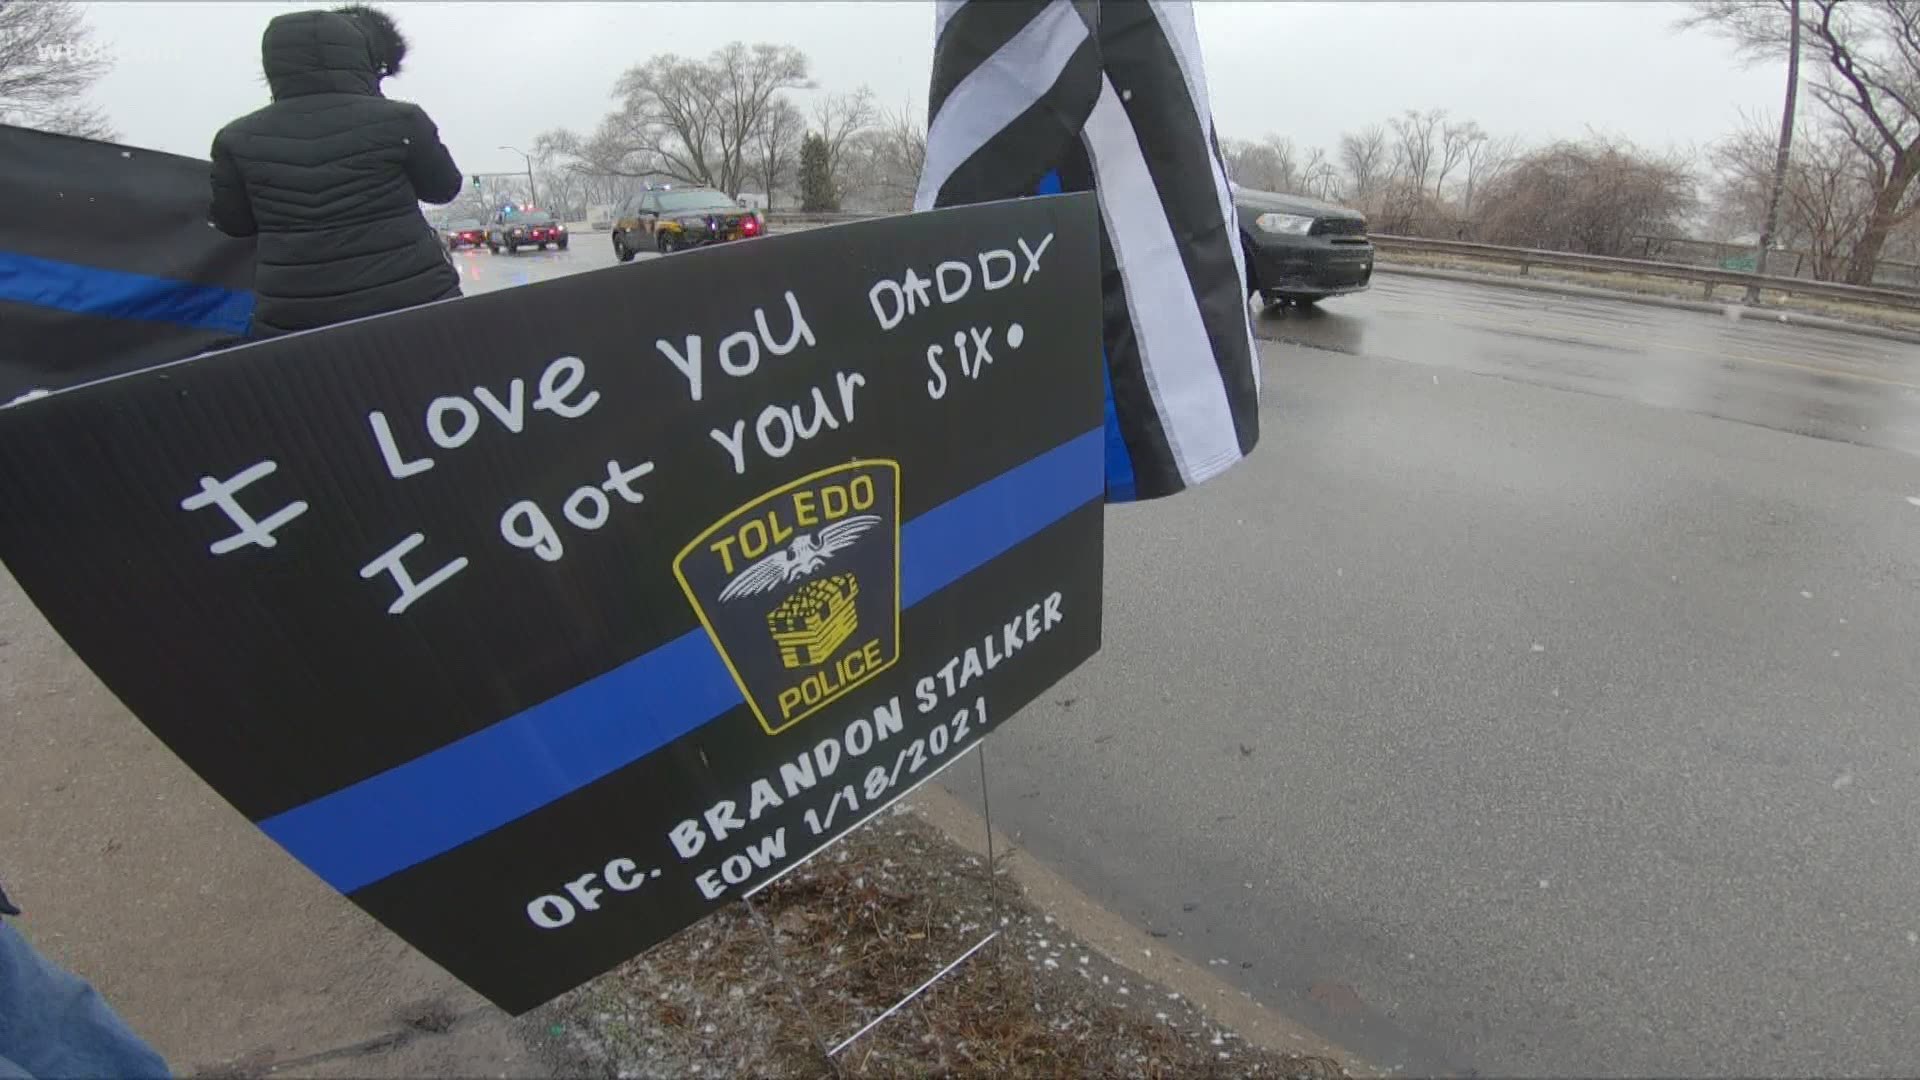 On Jan. 26, 2021, TPD Officer Brandon Stalker was laid to rest. It was a day of mourning, and remembrance, that united the community across our area.